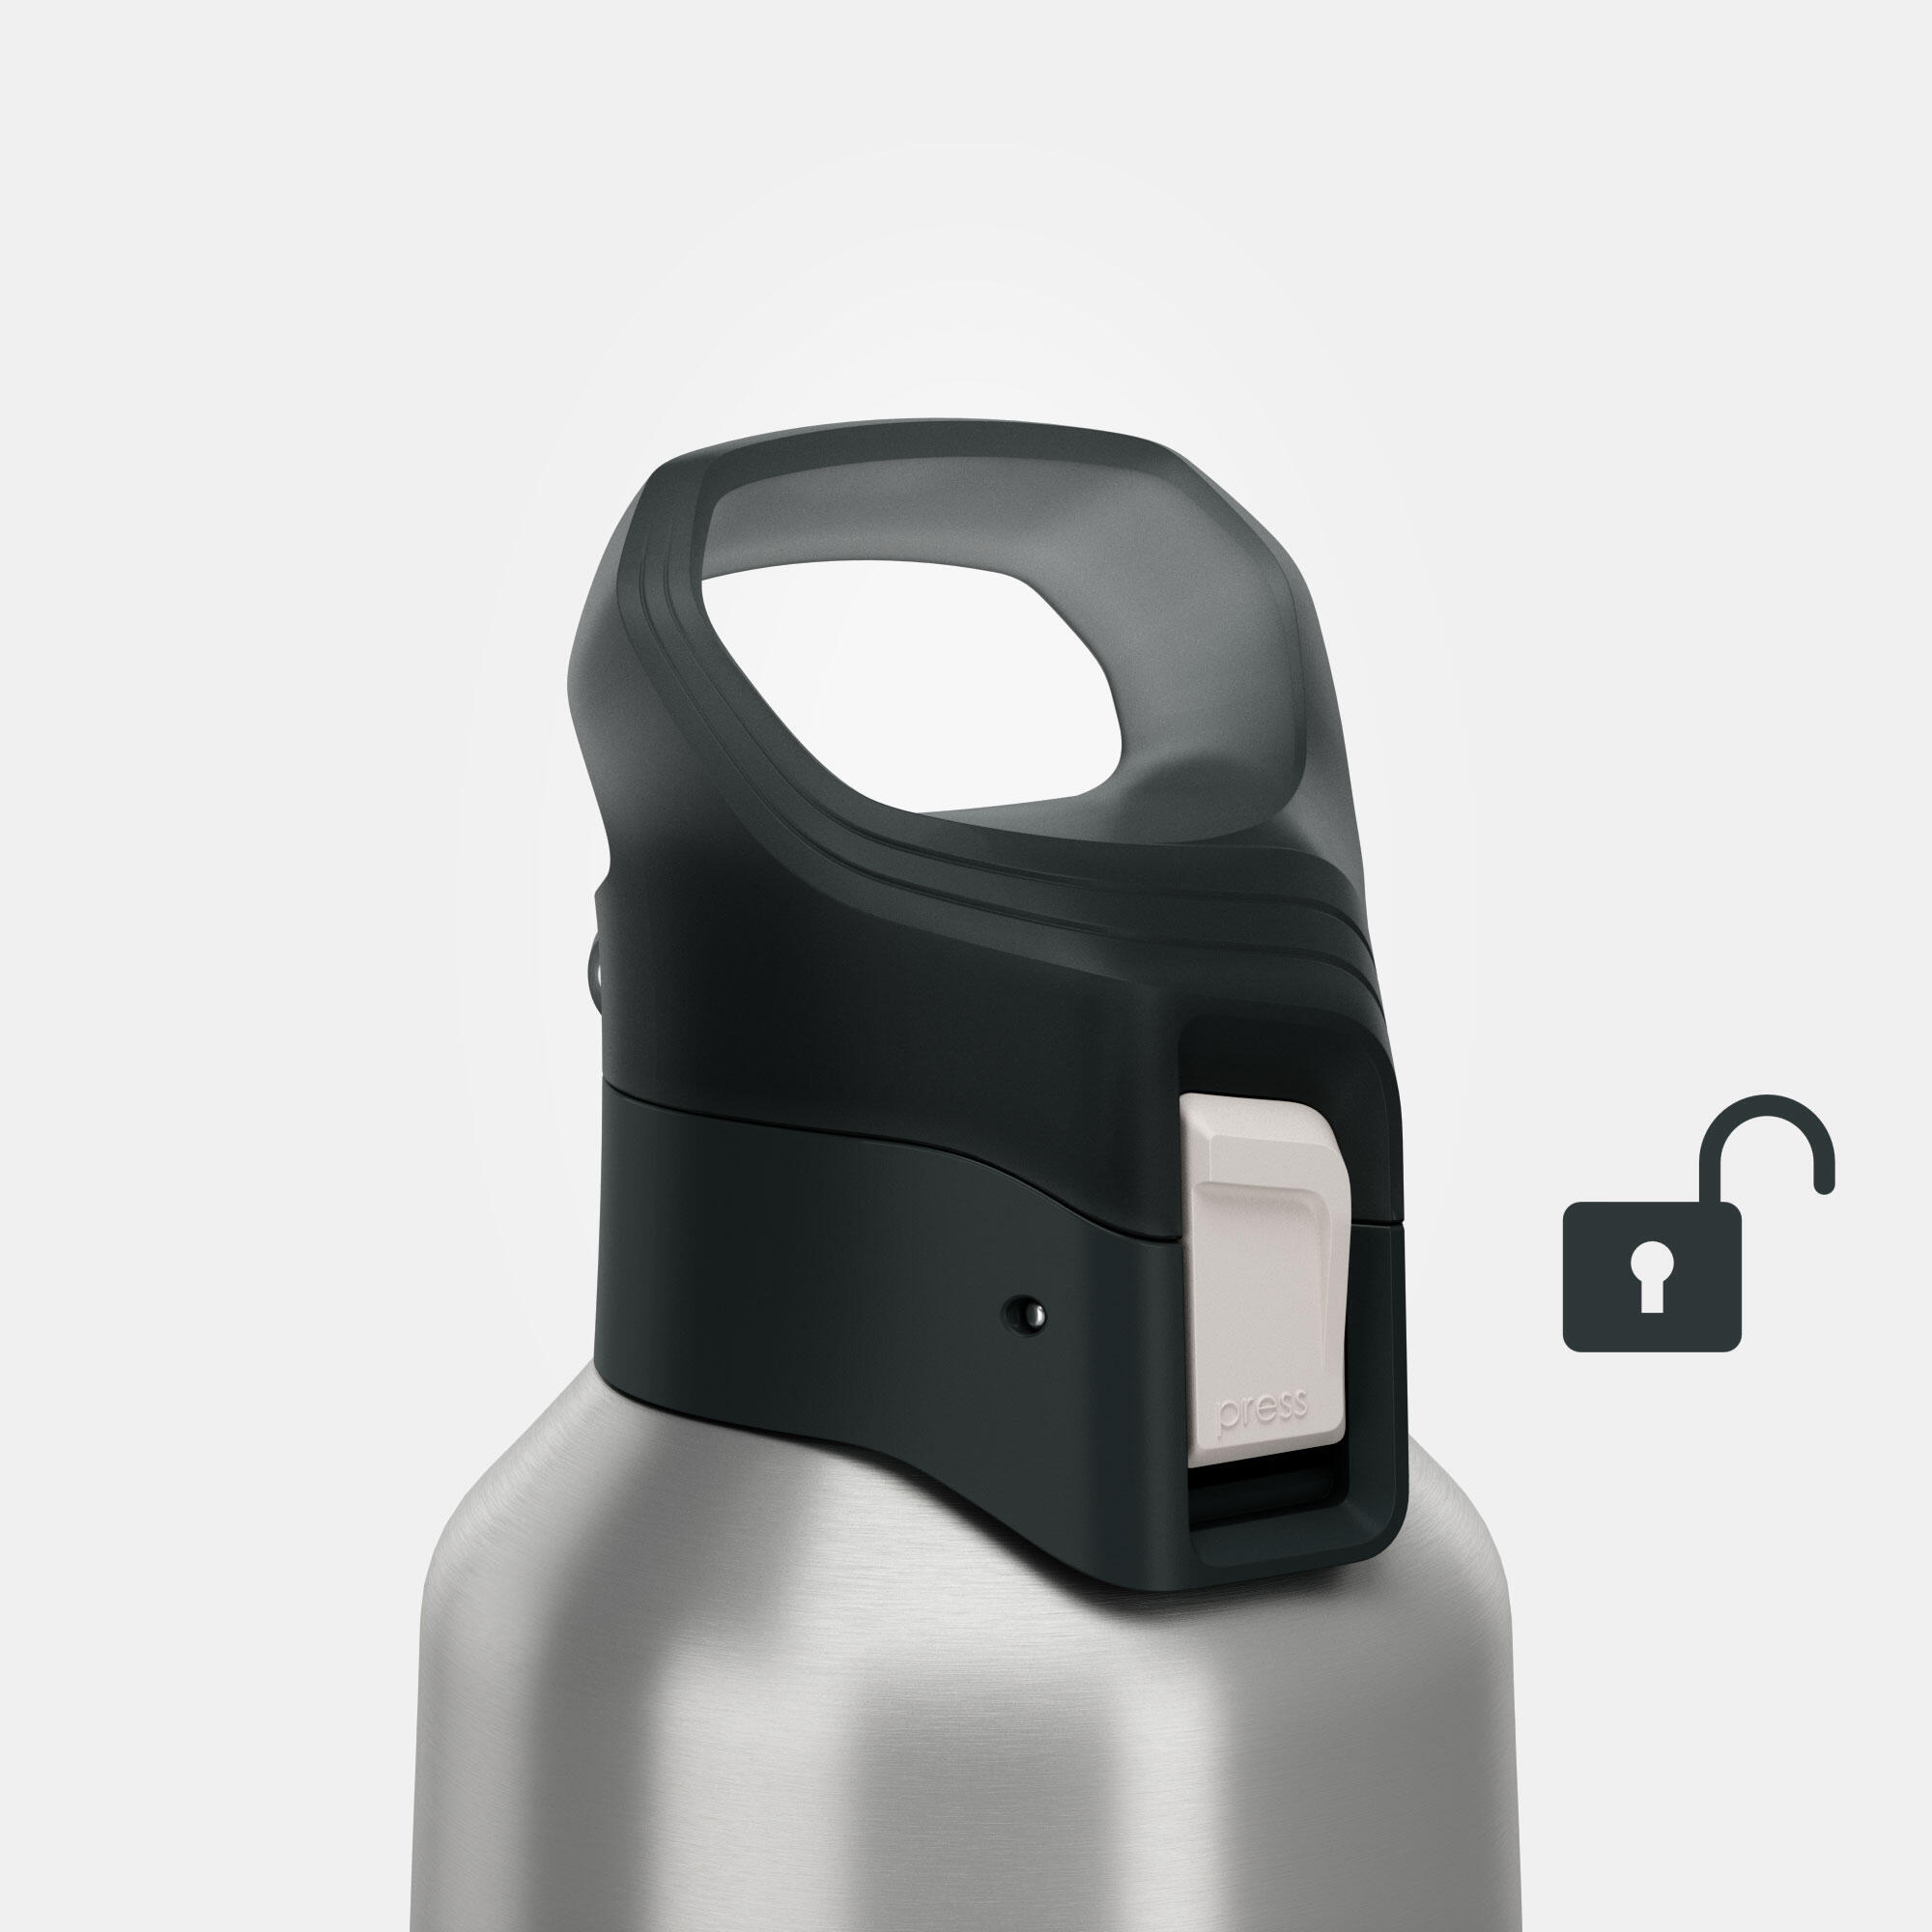 0.8 L stainless steel isothermal water bottle with quick-release cap for hiking  6/31